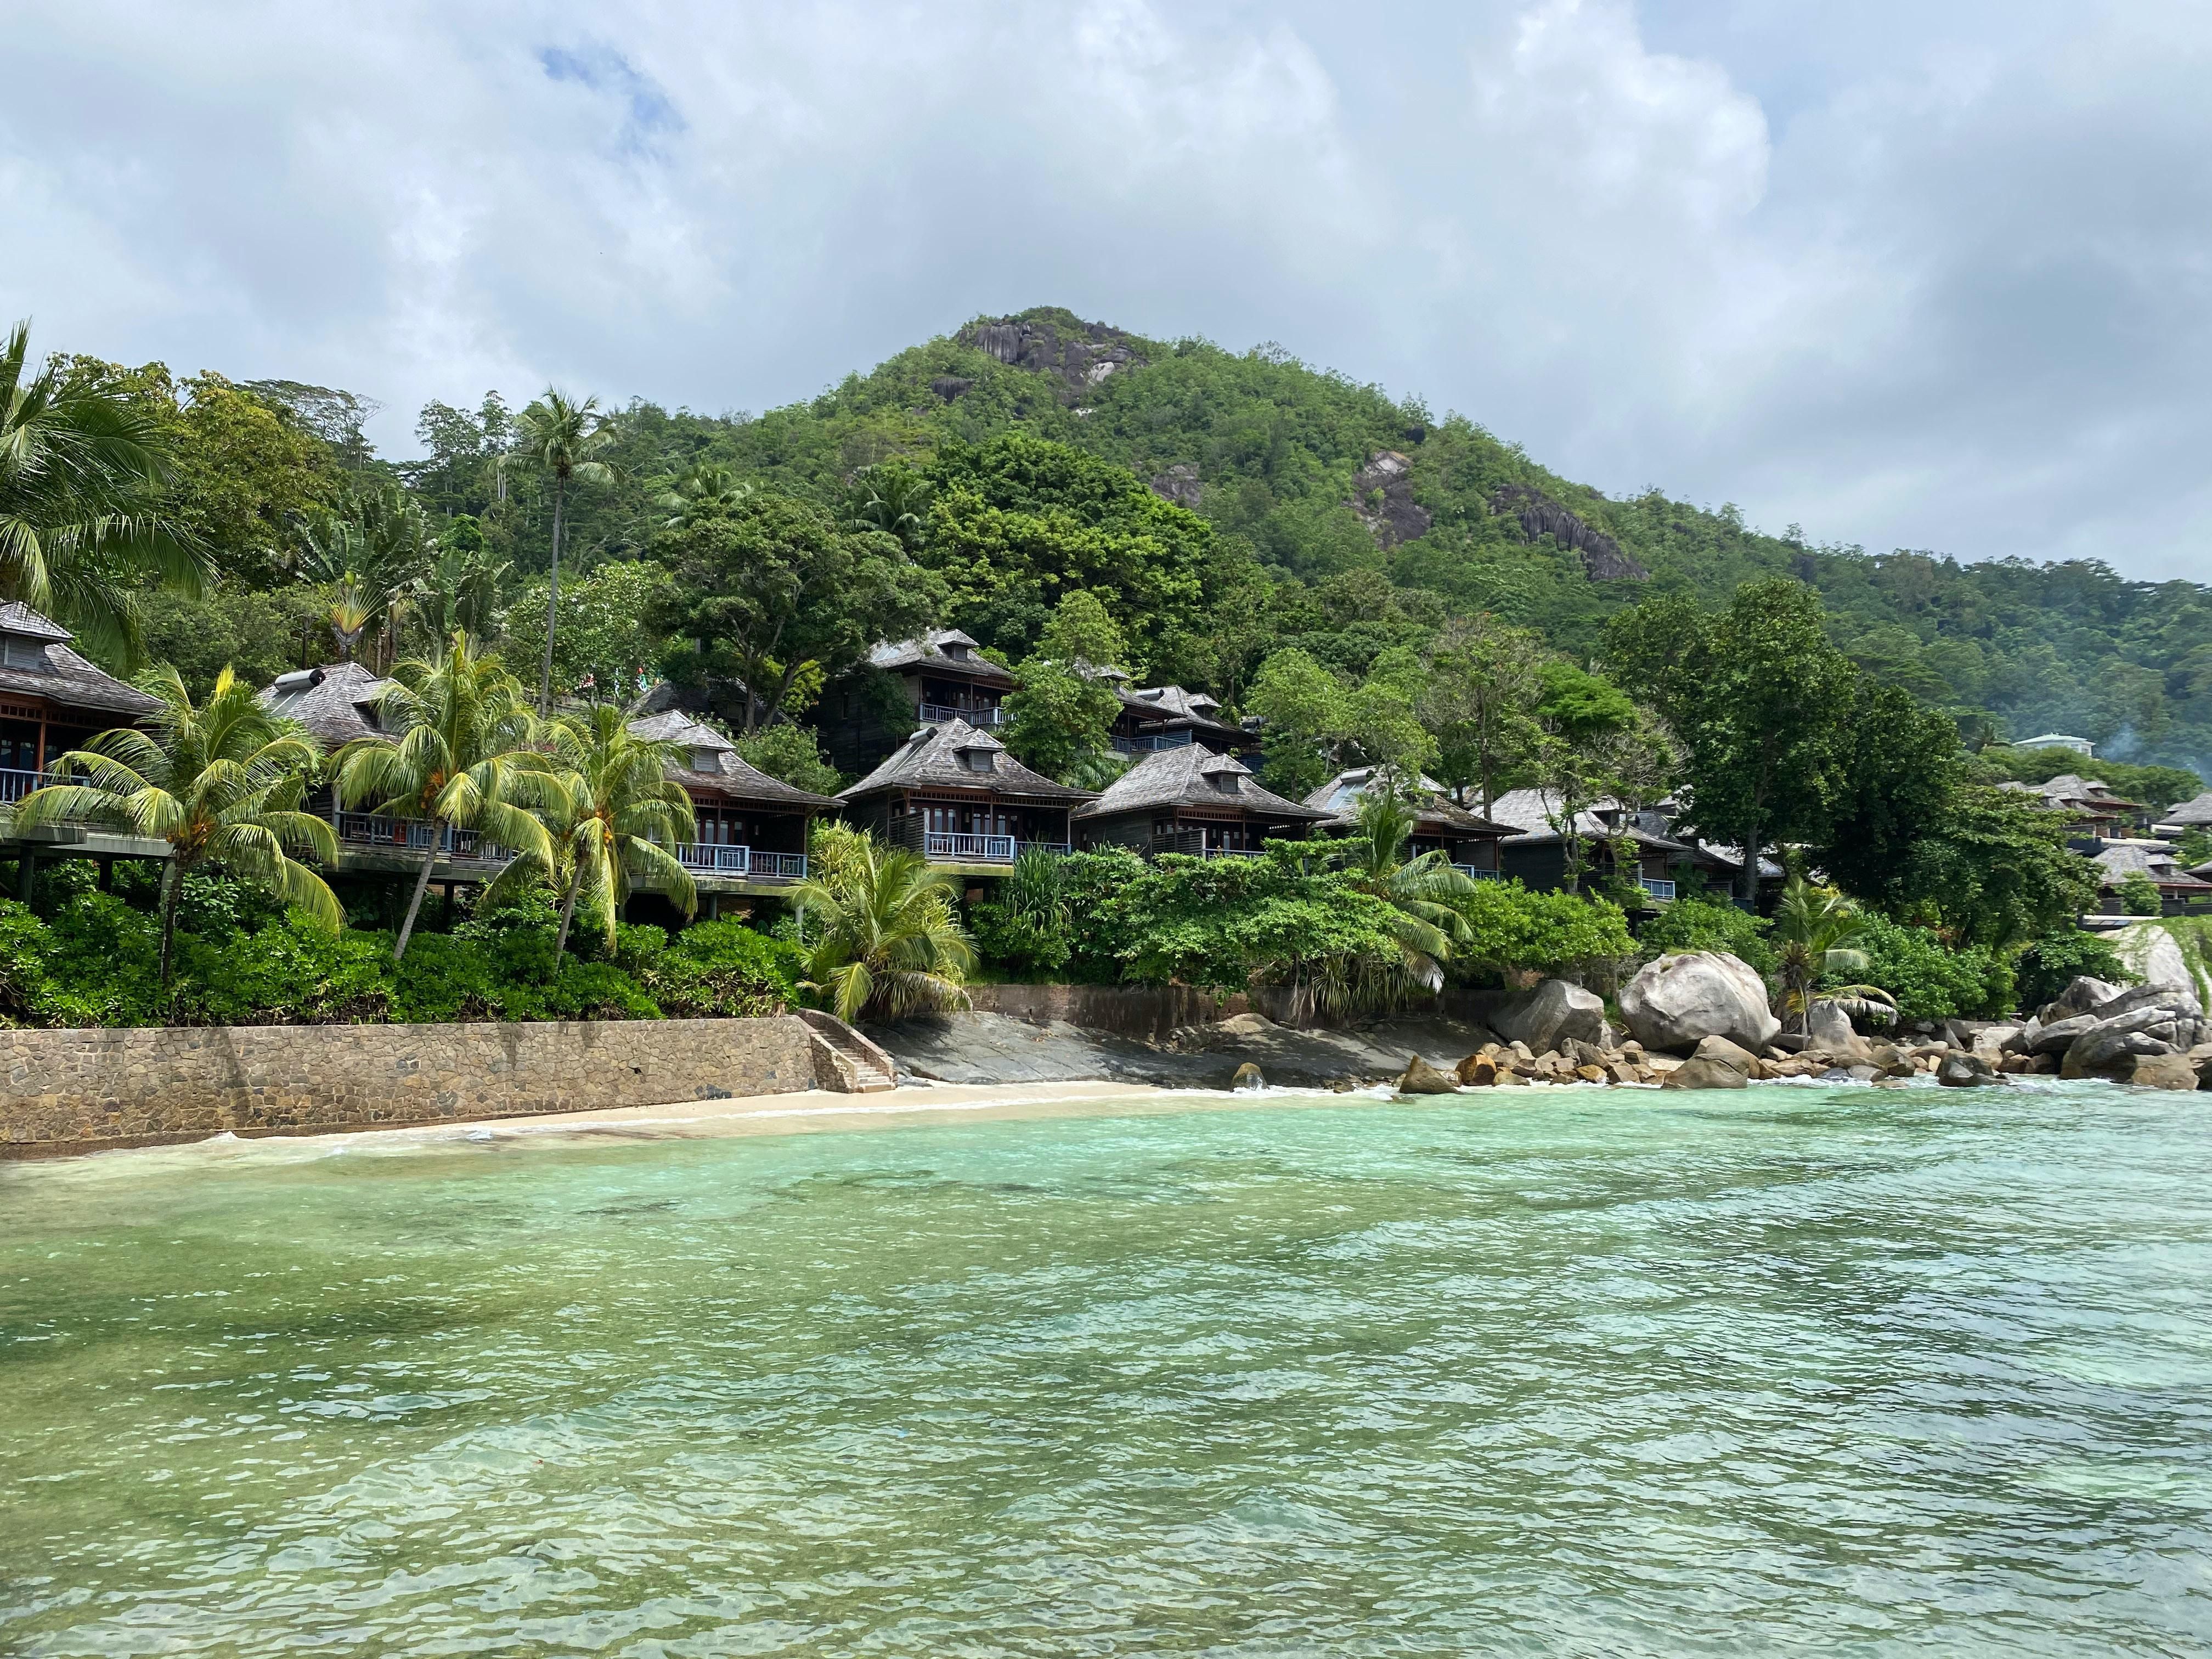 Fancy cabins and inviting beach in Victoria, Glacis, Seychelles.